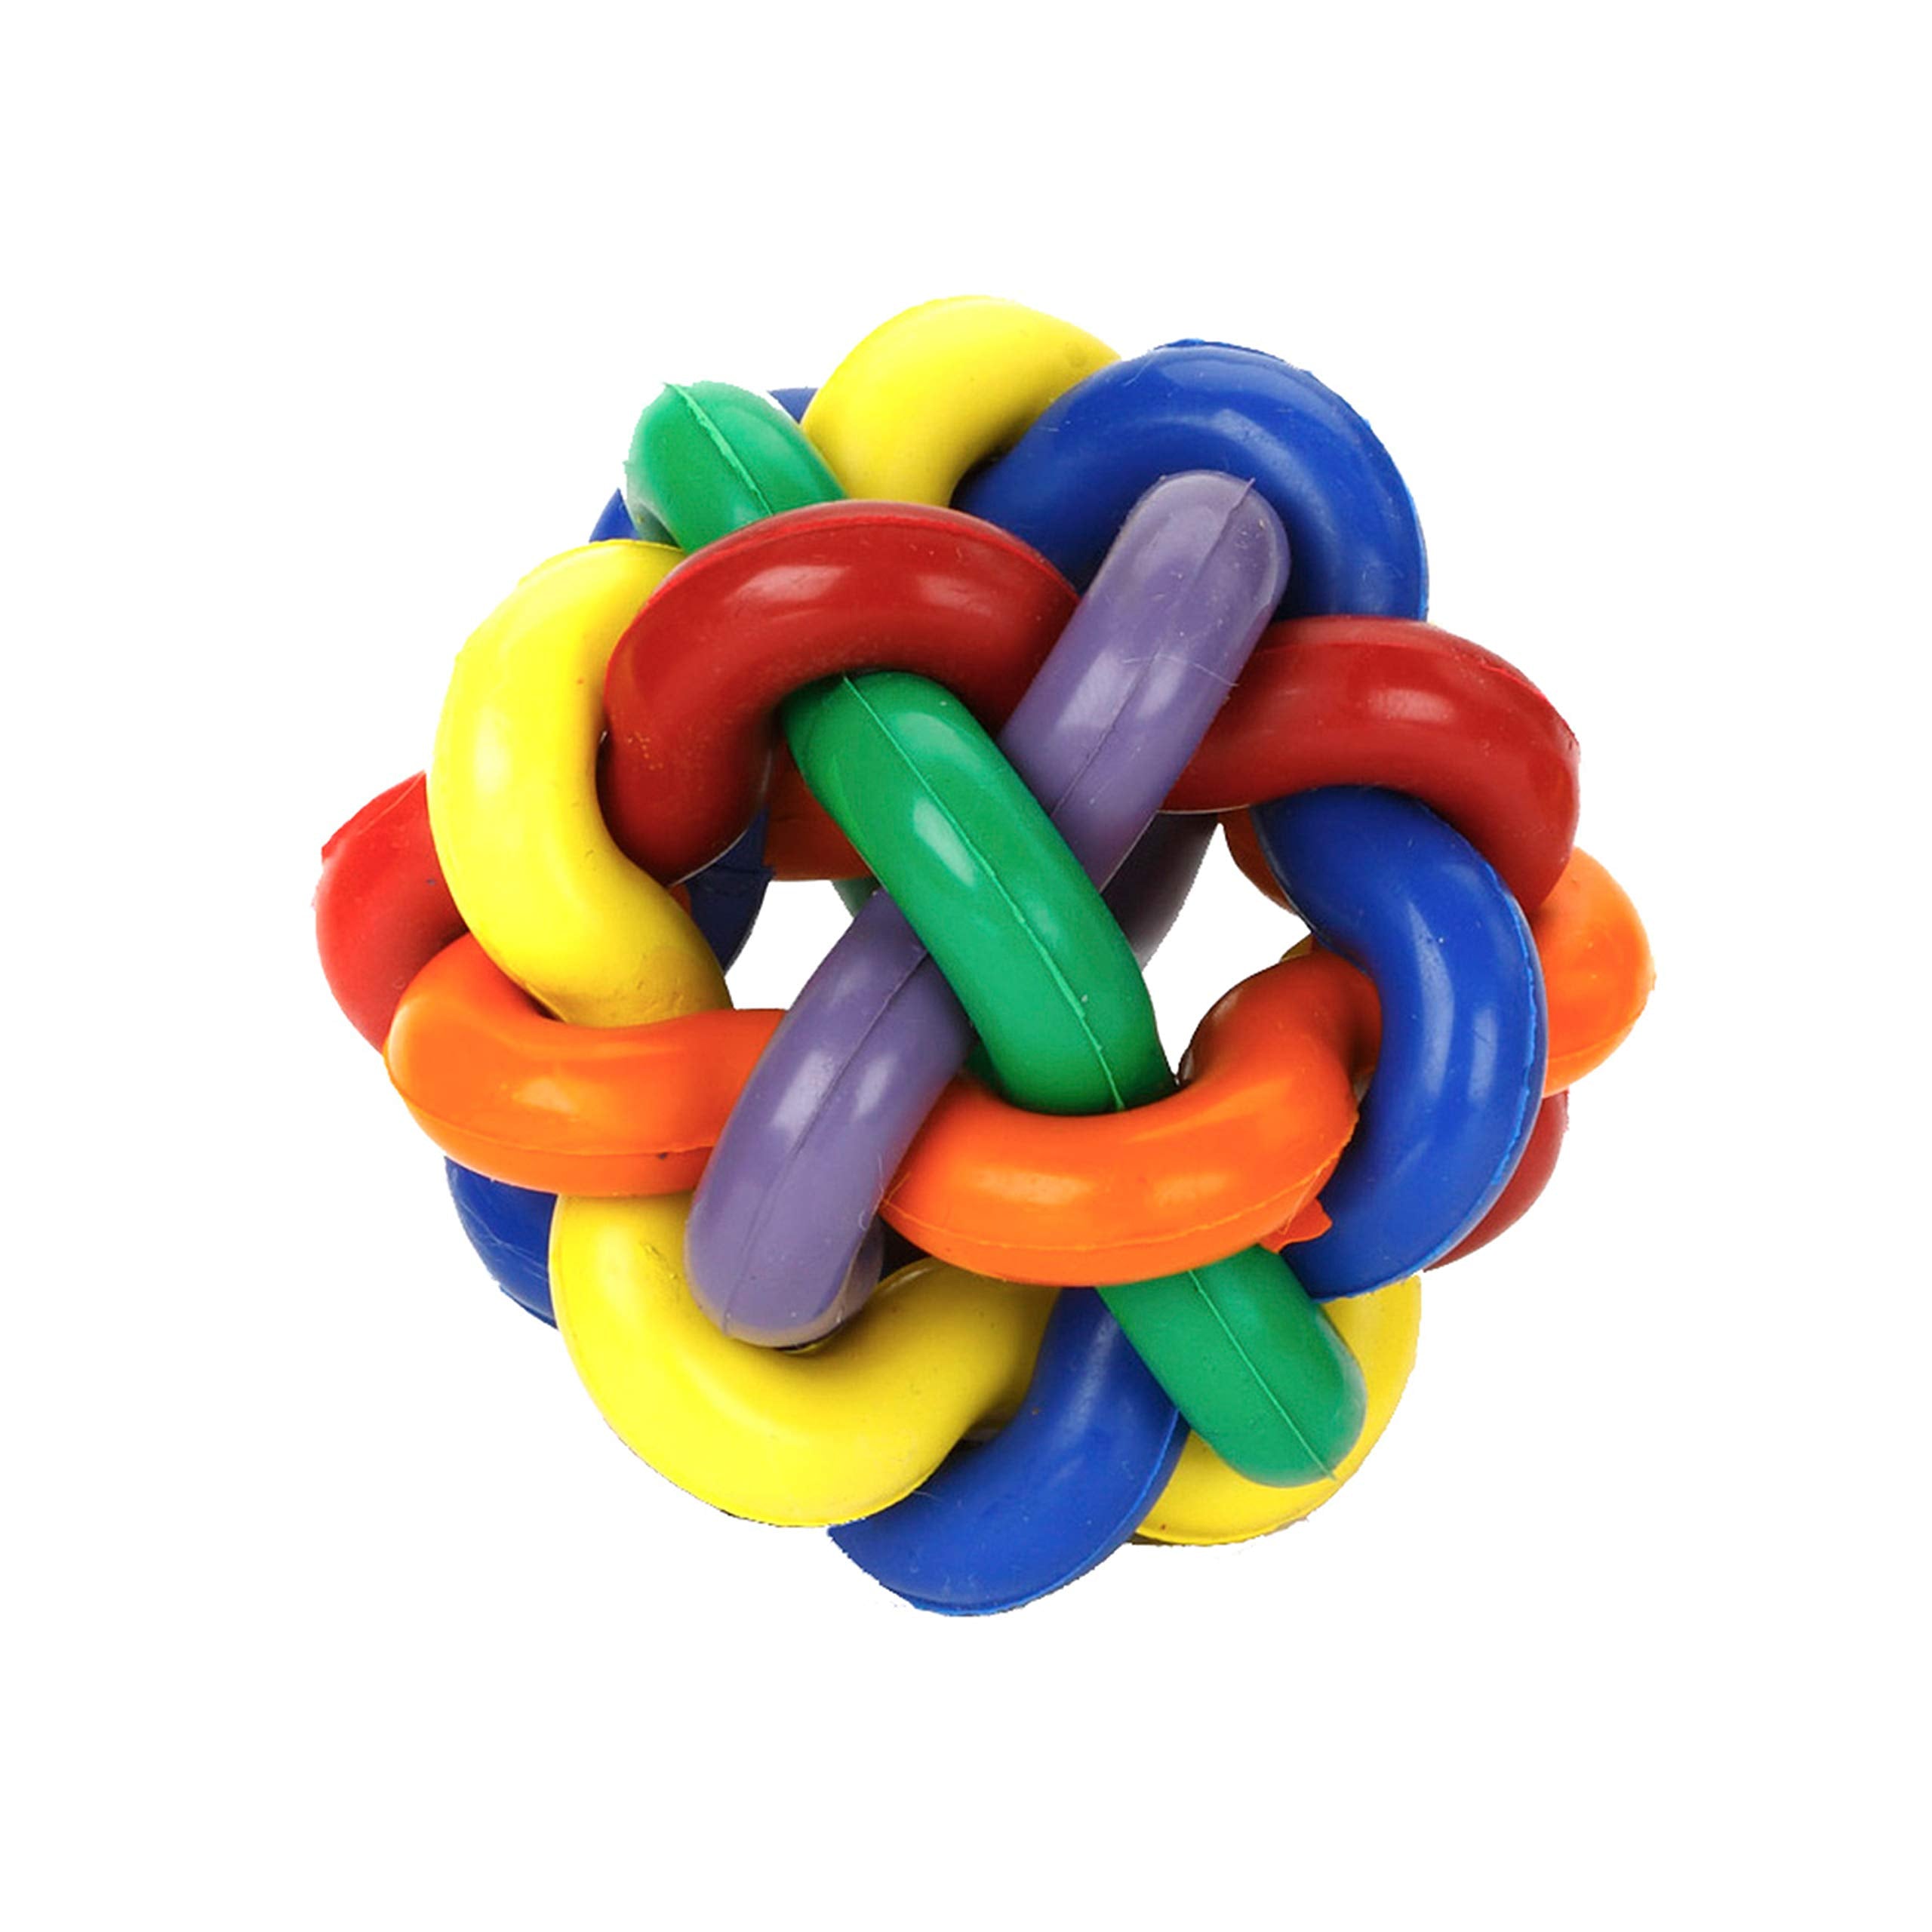 Multipet Nobbly Wobbly Multi-Colored Ball Rubber Dog Toy - Large - 4" Inches  